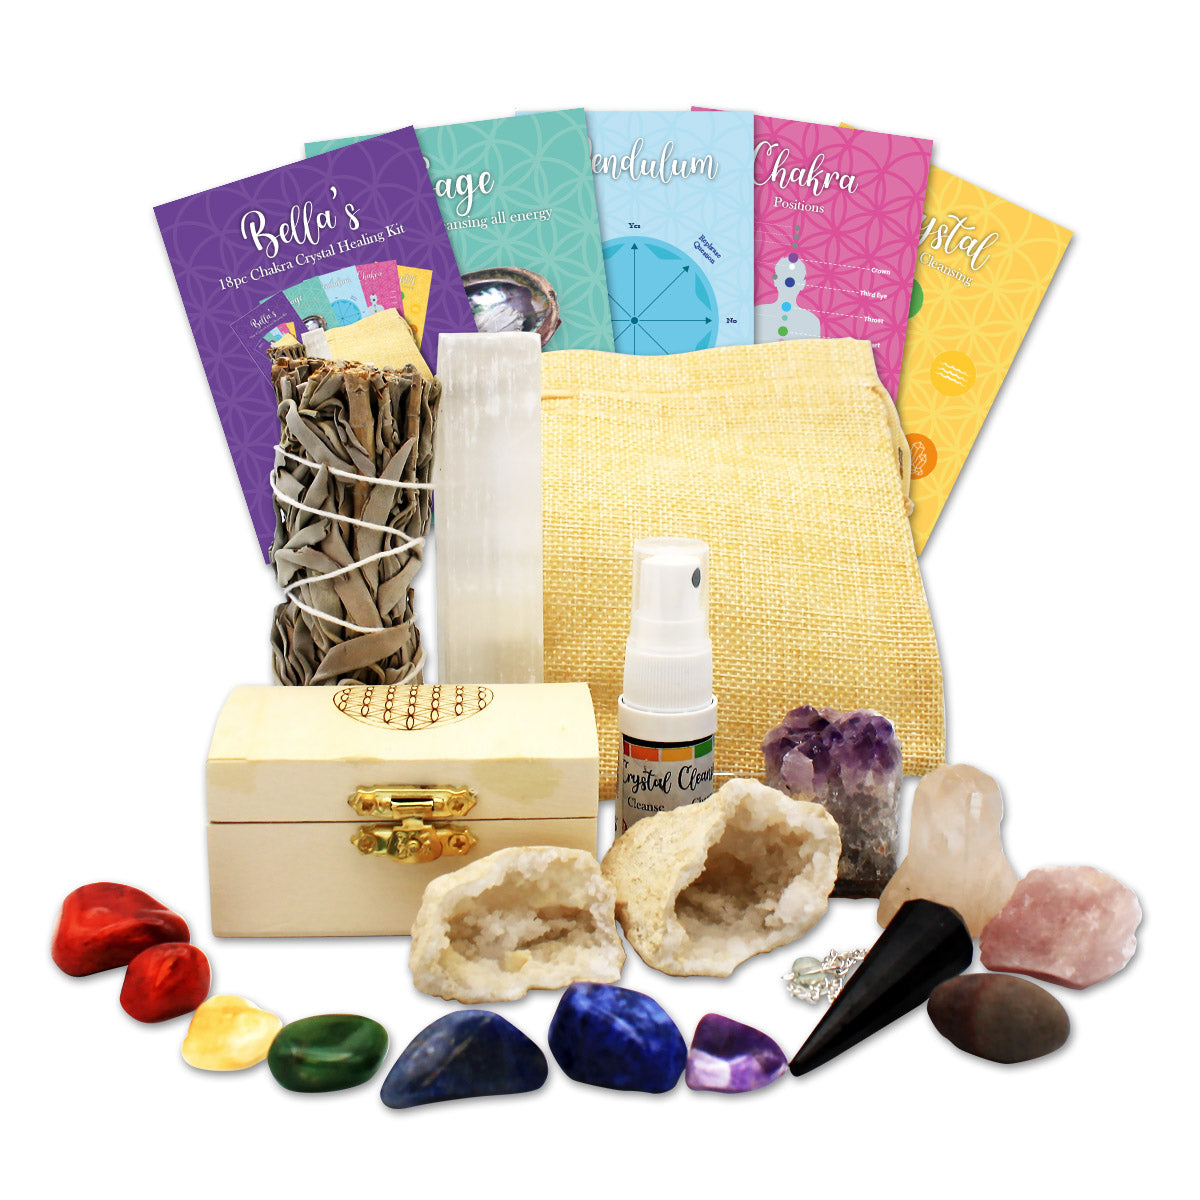 GeoFossils Bella's Eighteen pieces  Chakra Crystal Healing Kit  which includes  Chakra tumbles, Amethyst Cluster, Raw Stones, Sage, Crystal Cleansing Spray, Five Information which include Sage Smudging guide, Crystal Cleansing Guide, Chakra Balancing, How to use your pendulum, Metaphysical Information, Bohemian Gift Set